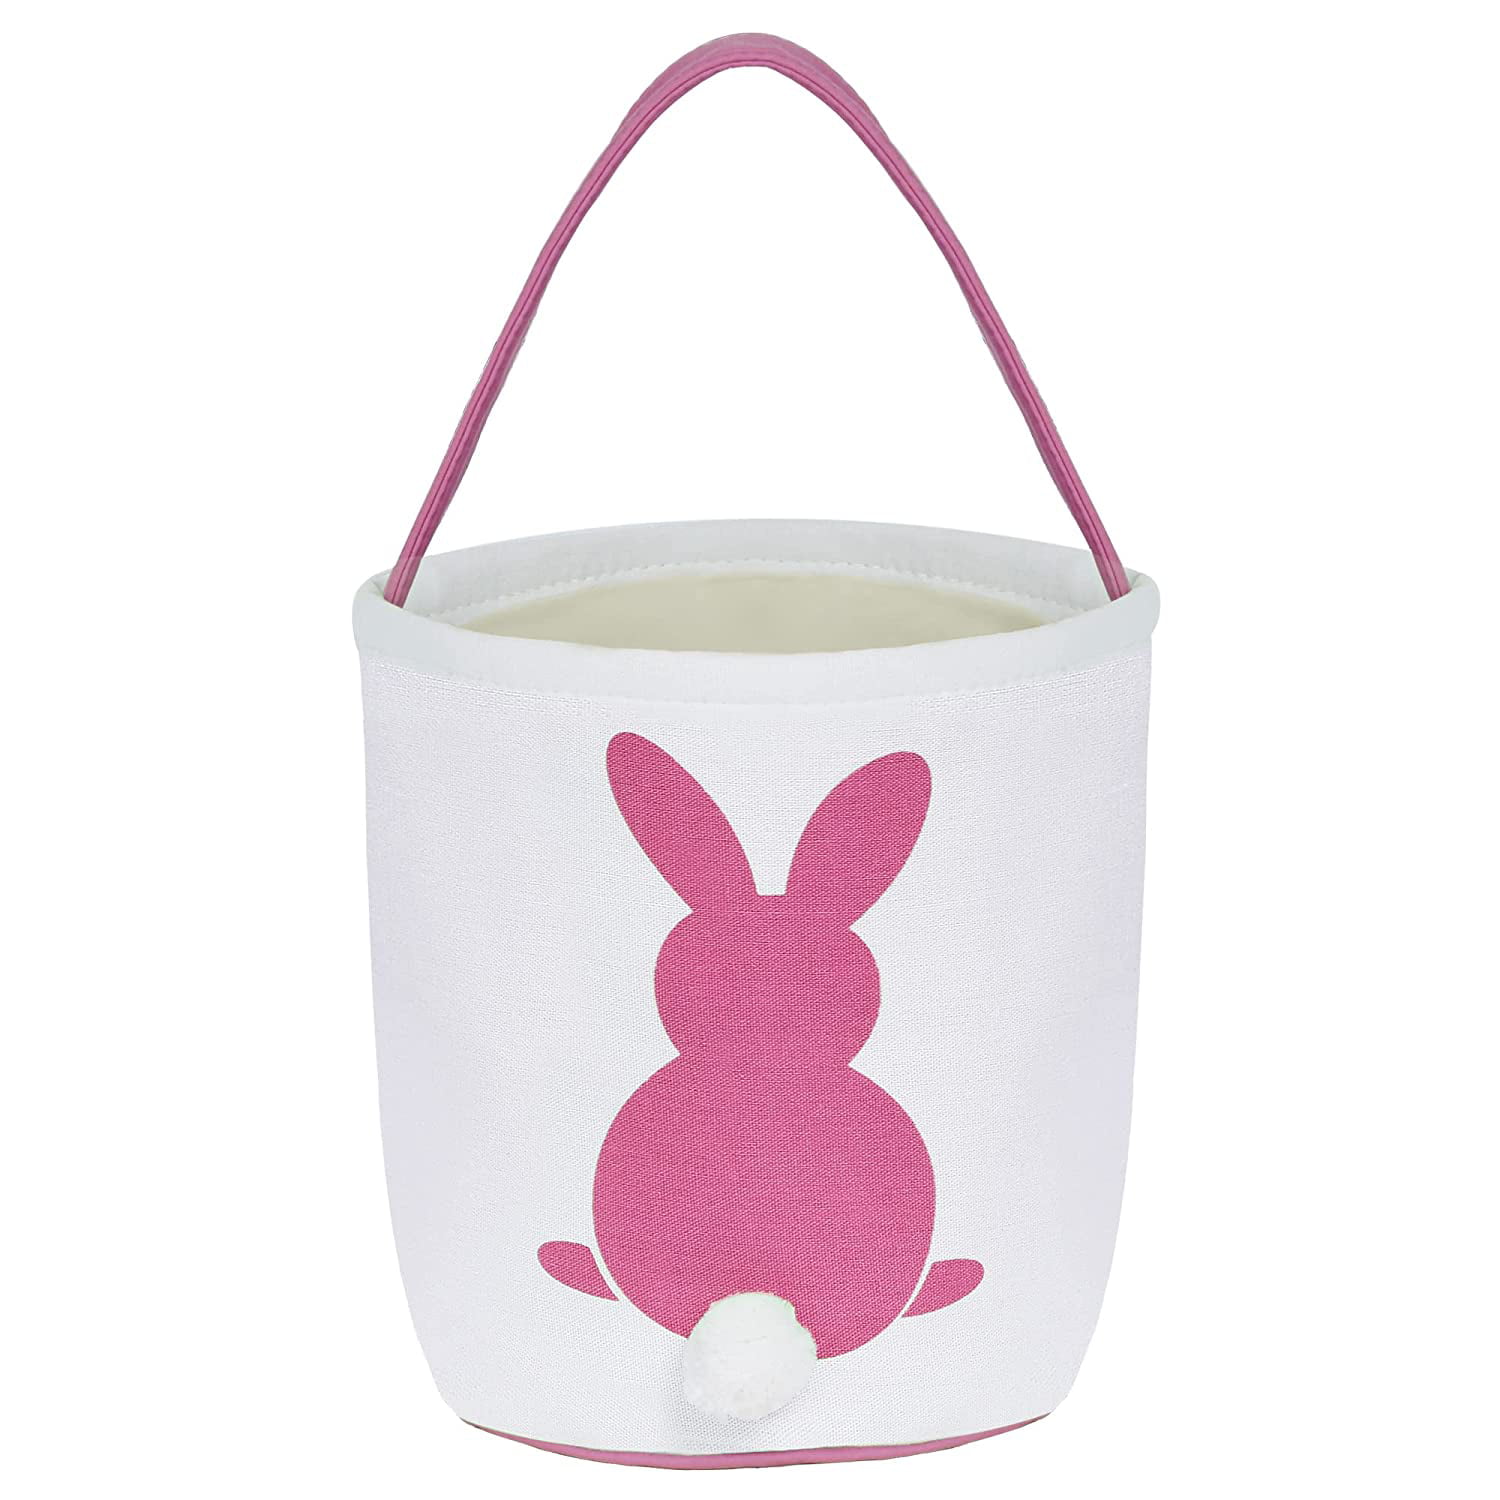 Easter Basket Plain Soft Cloth Bucket Cute Bunny Egg Hunt Canvas Small Collapsible Cheap Bag Gift for Kids Boys Toddlers Baby Infant Bulk Empty 